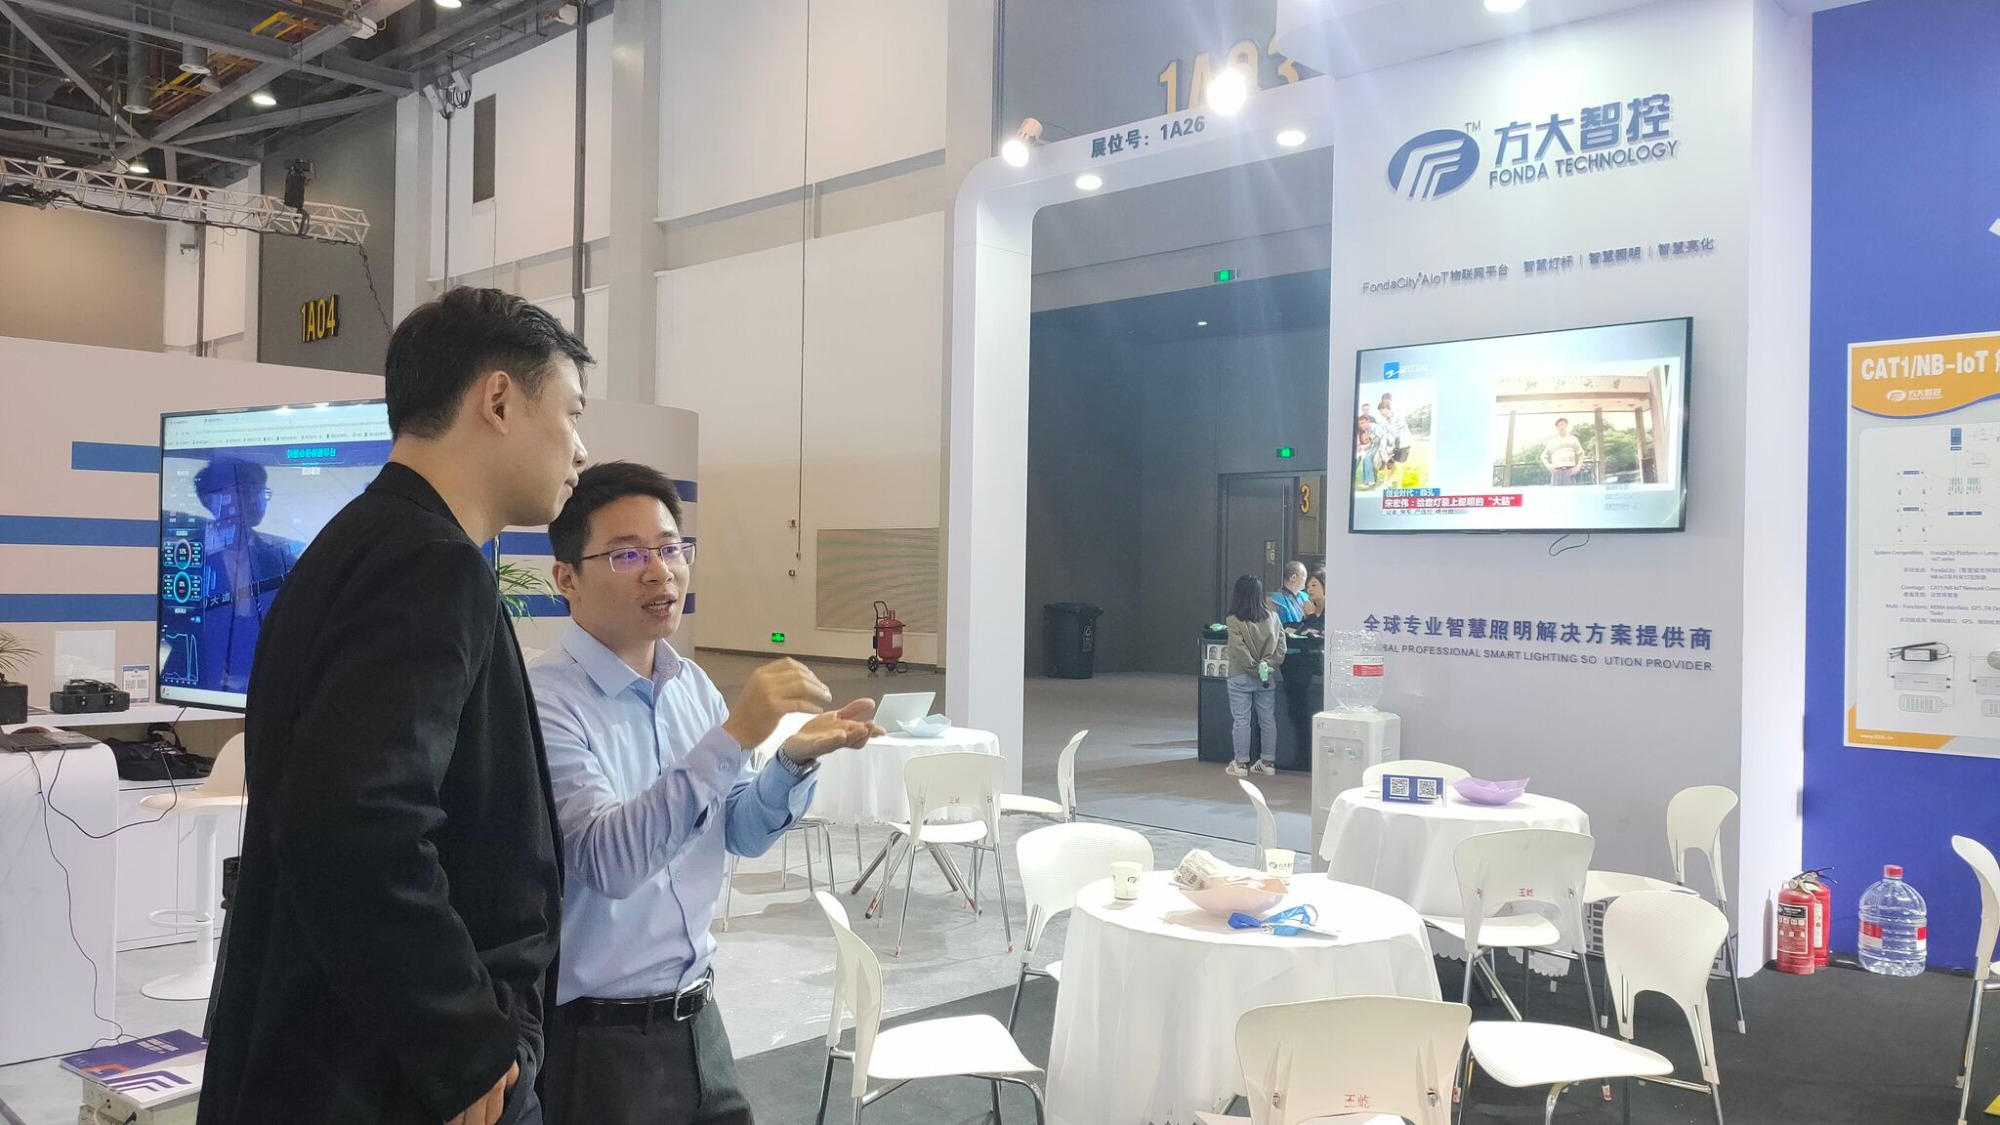 Thank you for visiting Fonda Tech booth on the first day of the Global Digital Trade Expo!